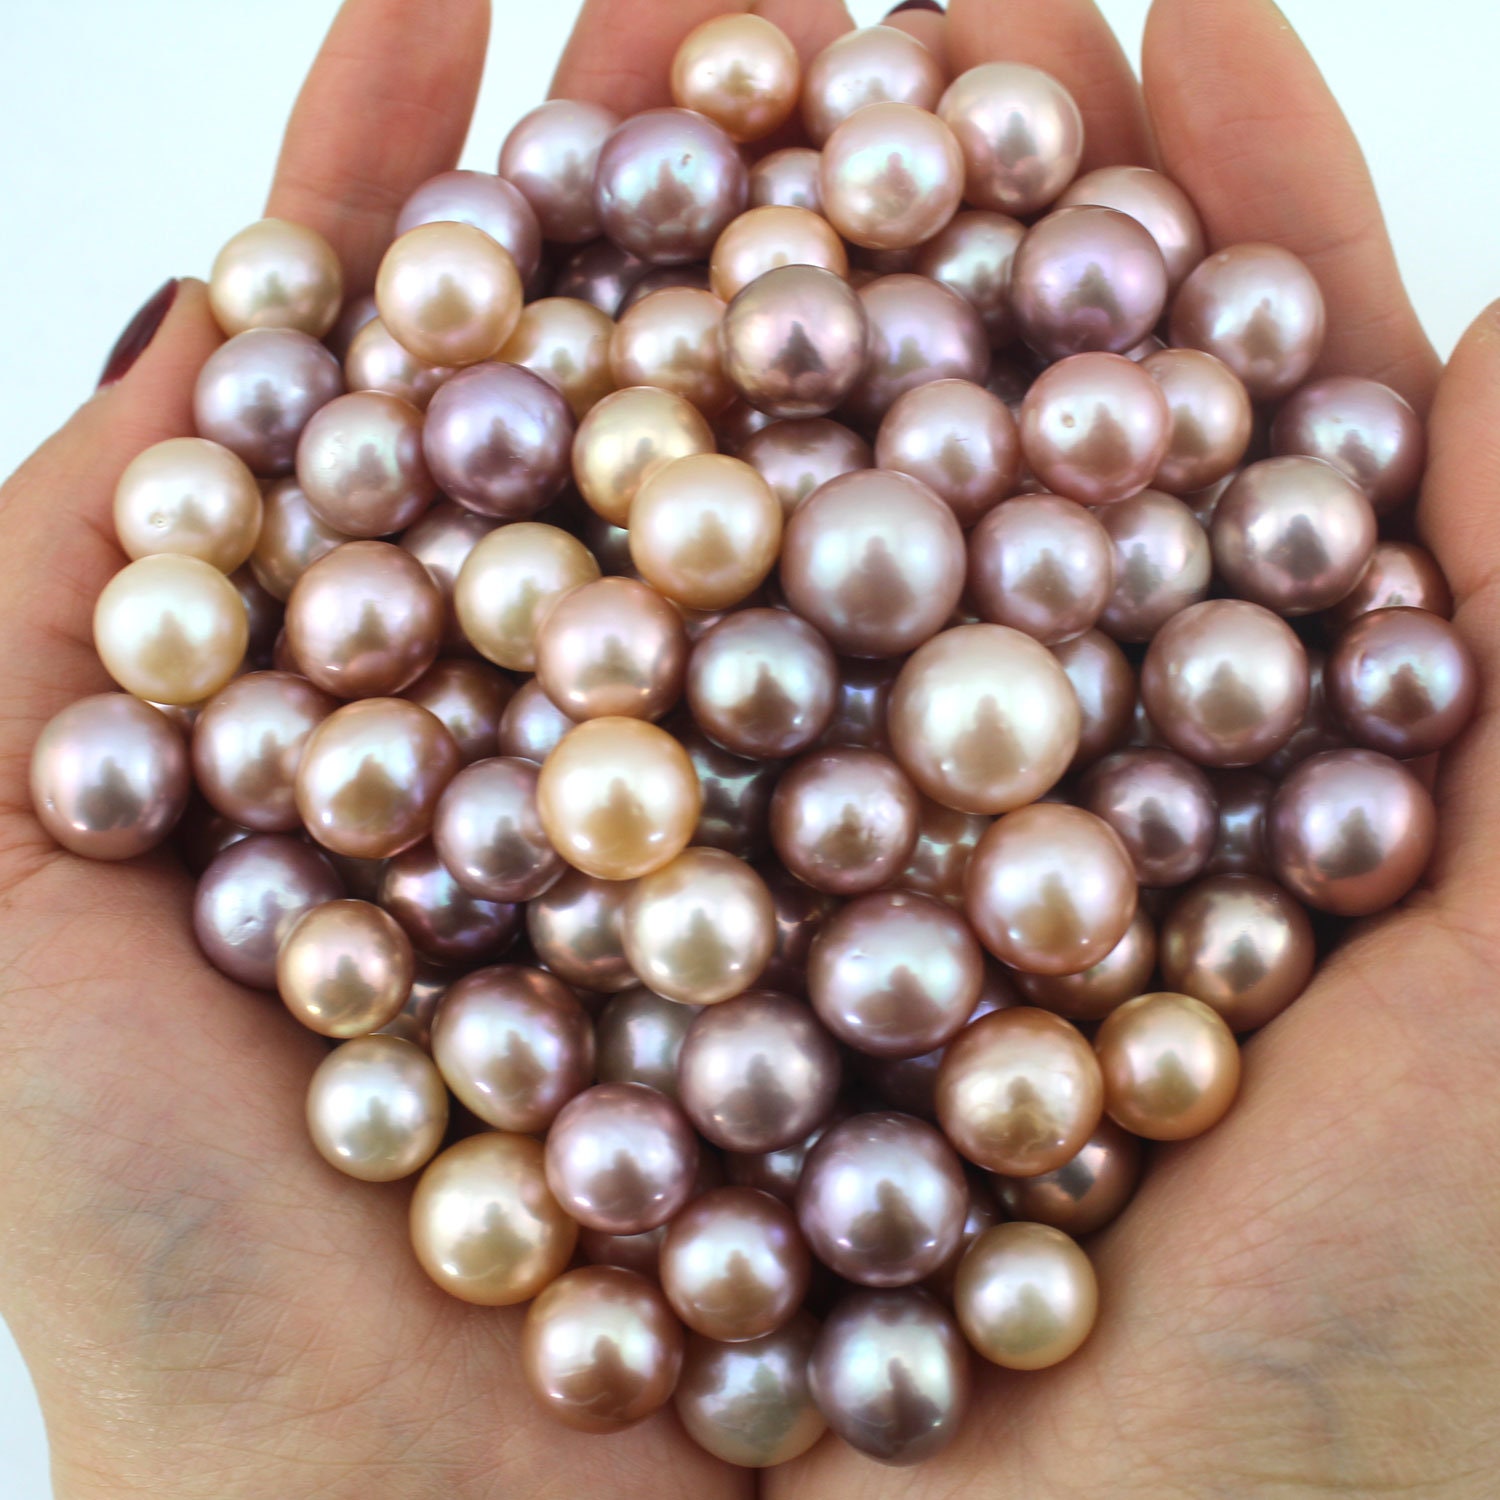 380pcs Art Faux Pearls Undrilled Faux Pearls No Hole Imitation Round Pearls  Beads Loose Pearls Decorative Bulk Filler Beads for Jewelry Making, Crafts